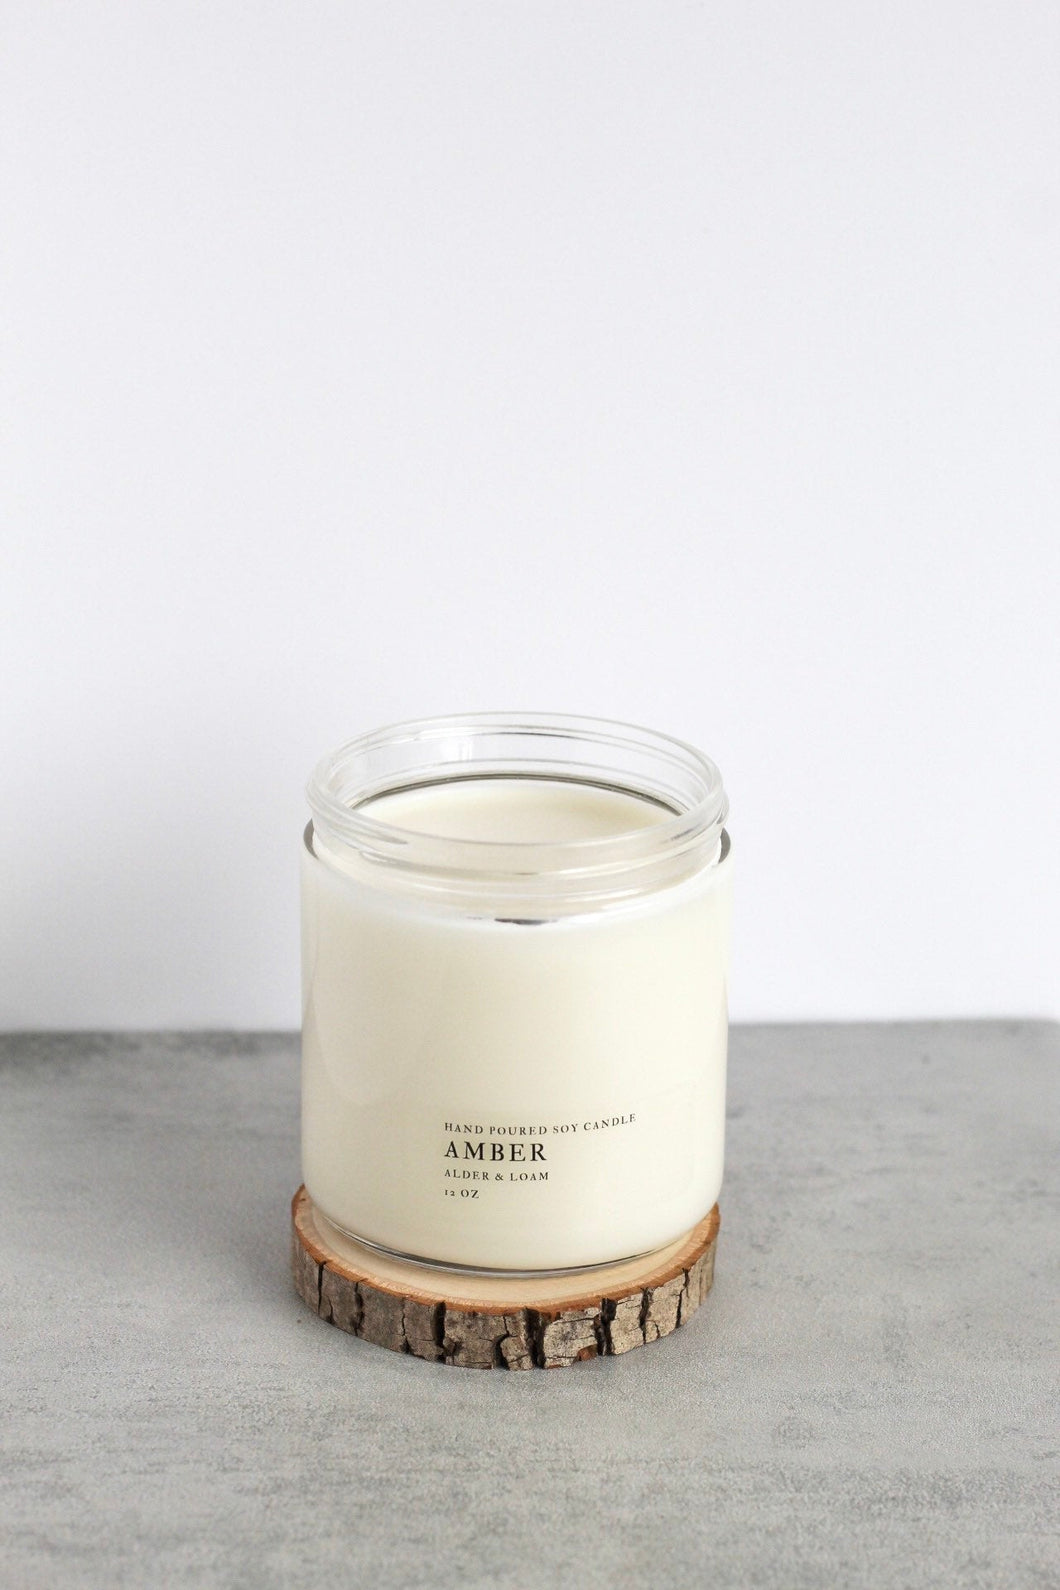 Amber Double Wick Soy Candle, Hand Poured, Natural, Eco Friendly, Earthy Scent, 12 oz Jar